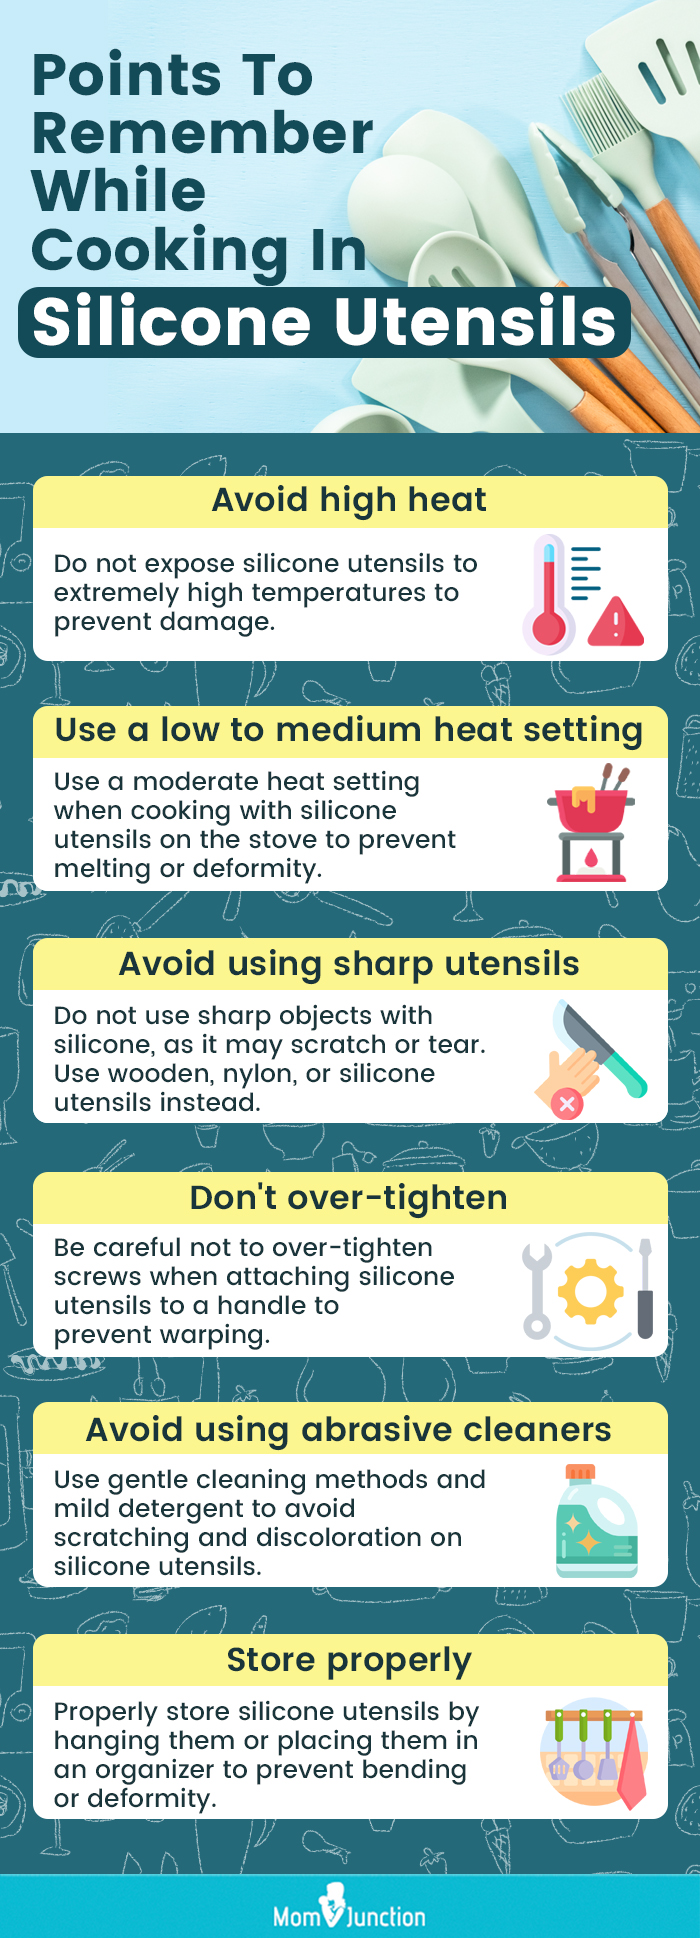 Points To Remember While Cooking In Silicone Utensils (Infographic)